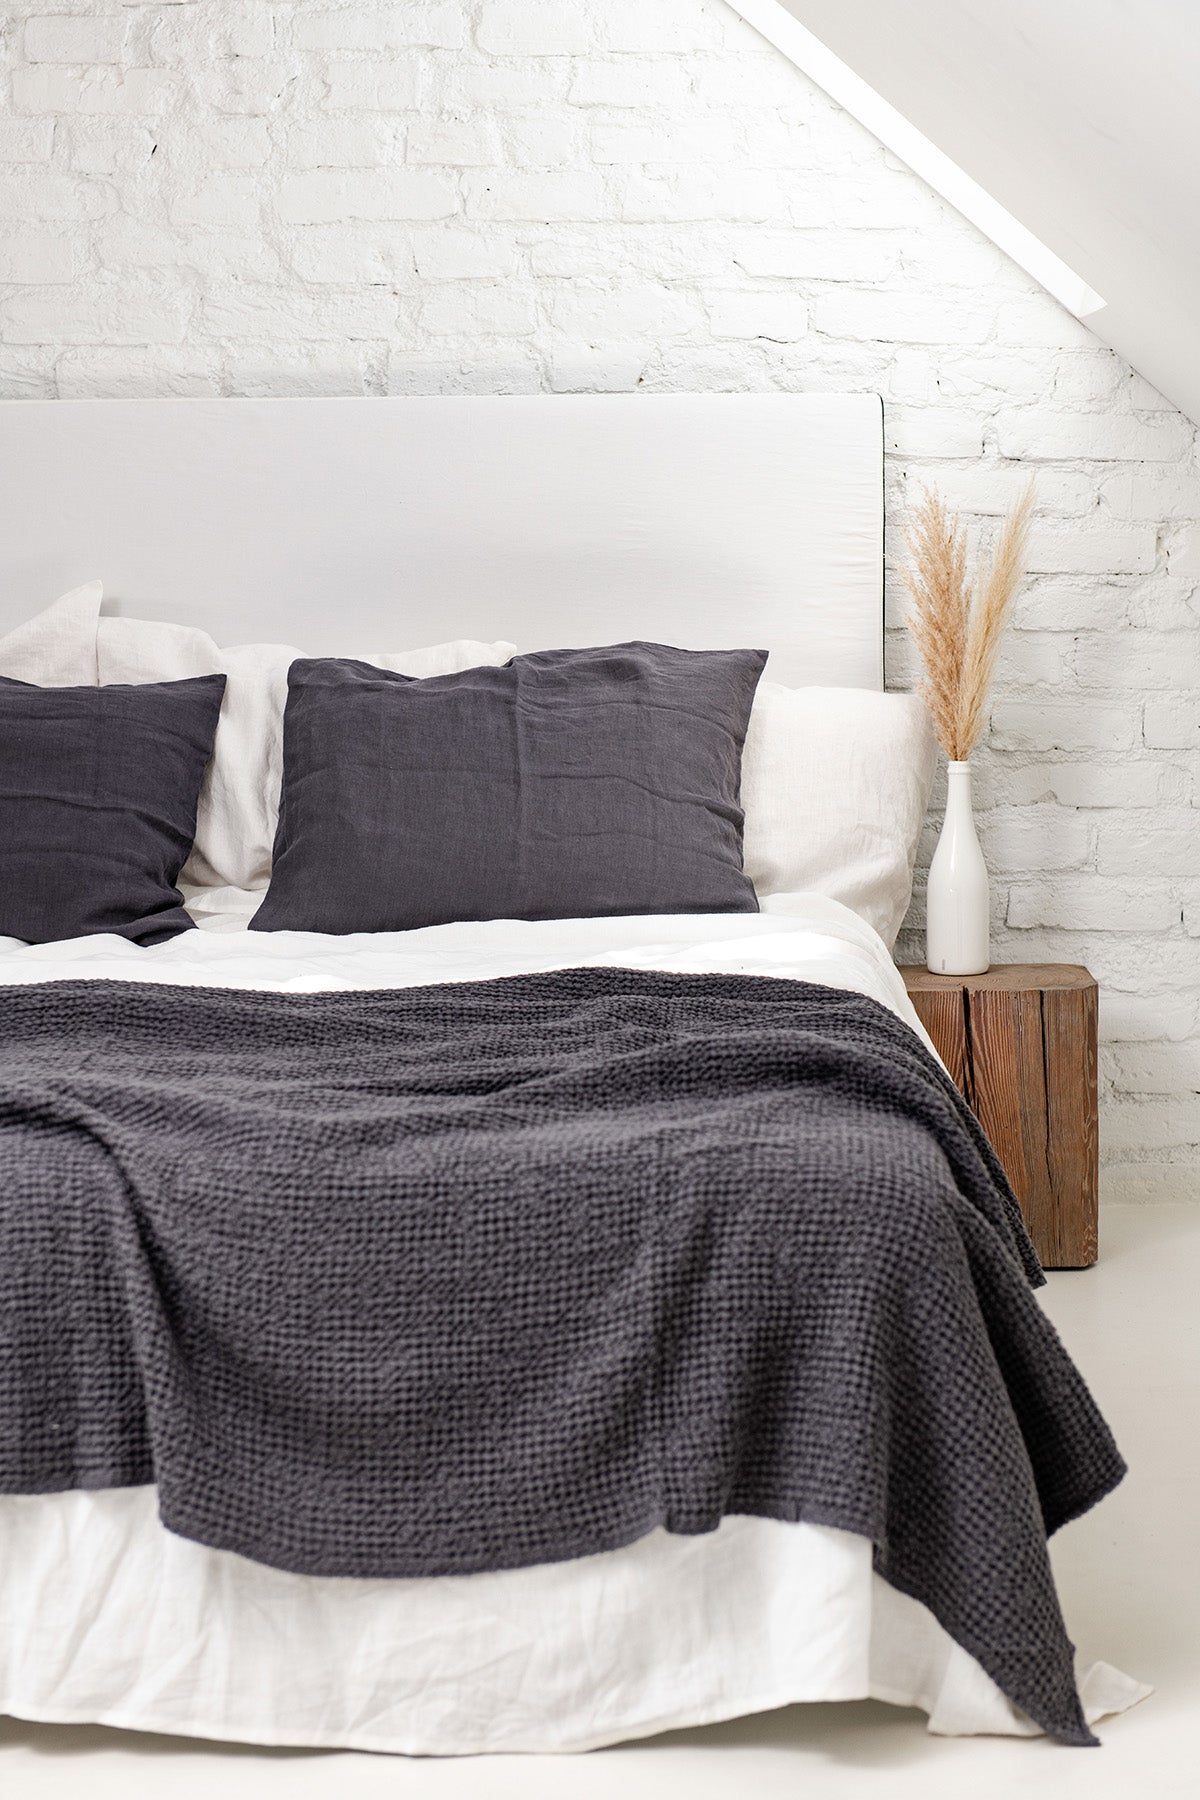 Bed With Linen Waffle Bed Throw in Charcoal On Top By AmourLinen